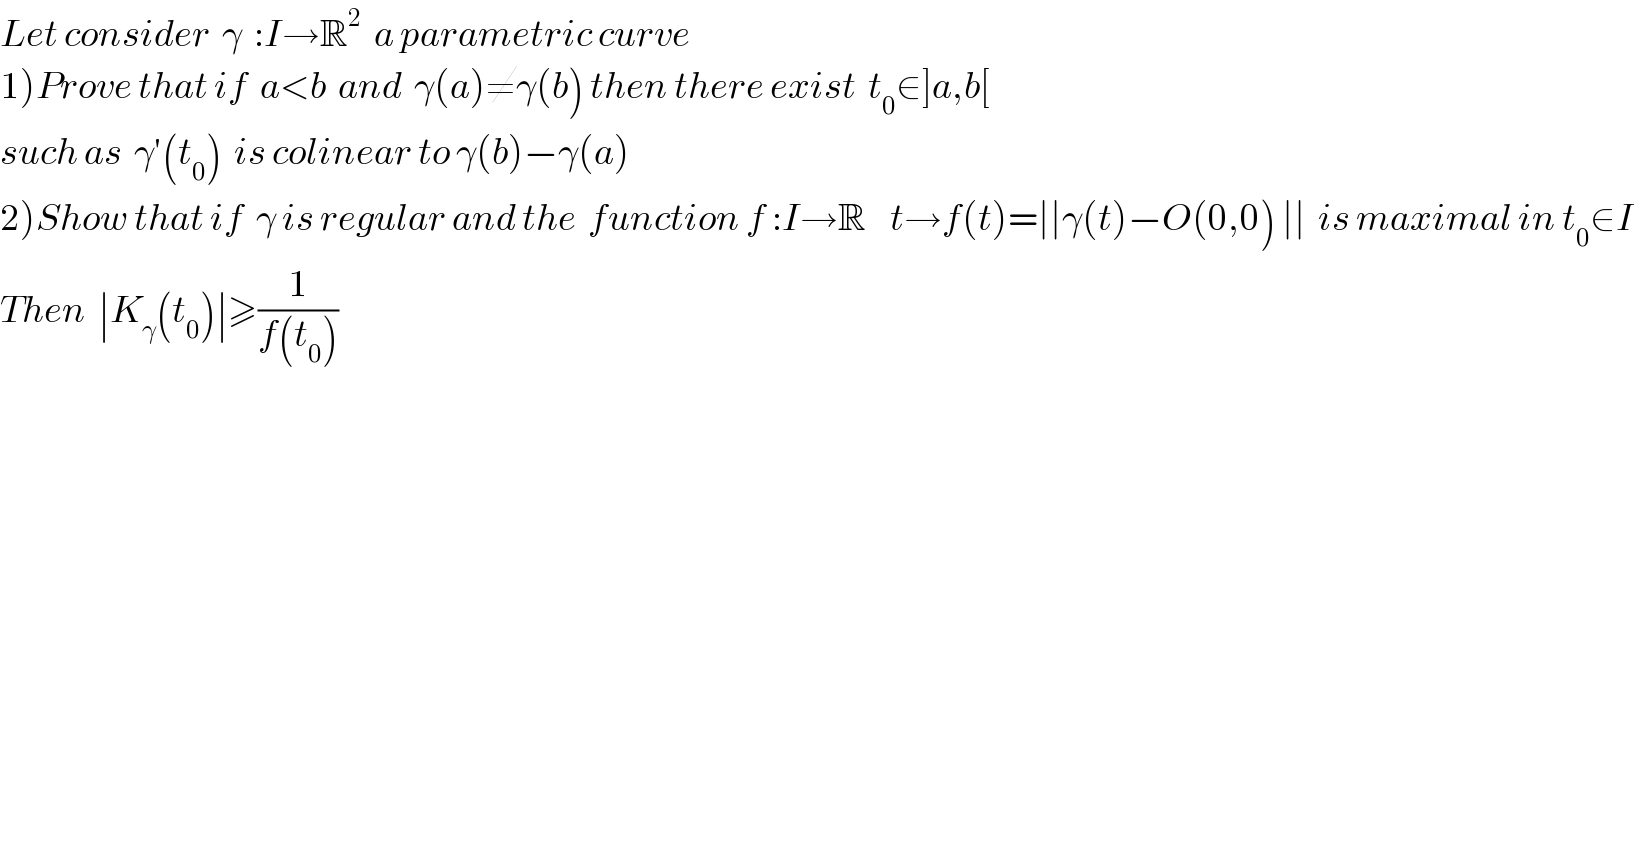 Let consider  γ  :I→R^2   a parametric curve   1)Prove that if  a<b  and  γ(a)≠γ(b) then there exist  t_0 ∈]a,b[    such as  γ′(t_0 )  is colinear to γ(b)−γ(a)   2)Show that if  γ is regular and the  function f :I→R    t→f(t)=∣∣γ(t)−O(0,0) ∣∣  is maximal in t_0 ∈I  Then  ∣K_γ (t_0 )∣≥(1/(f(t_0 )))  